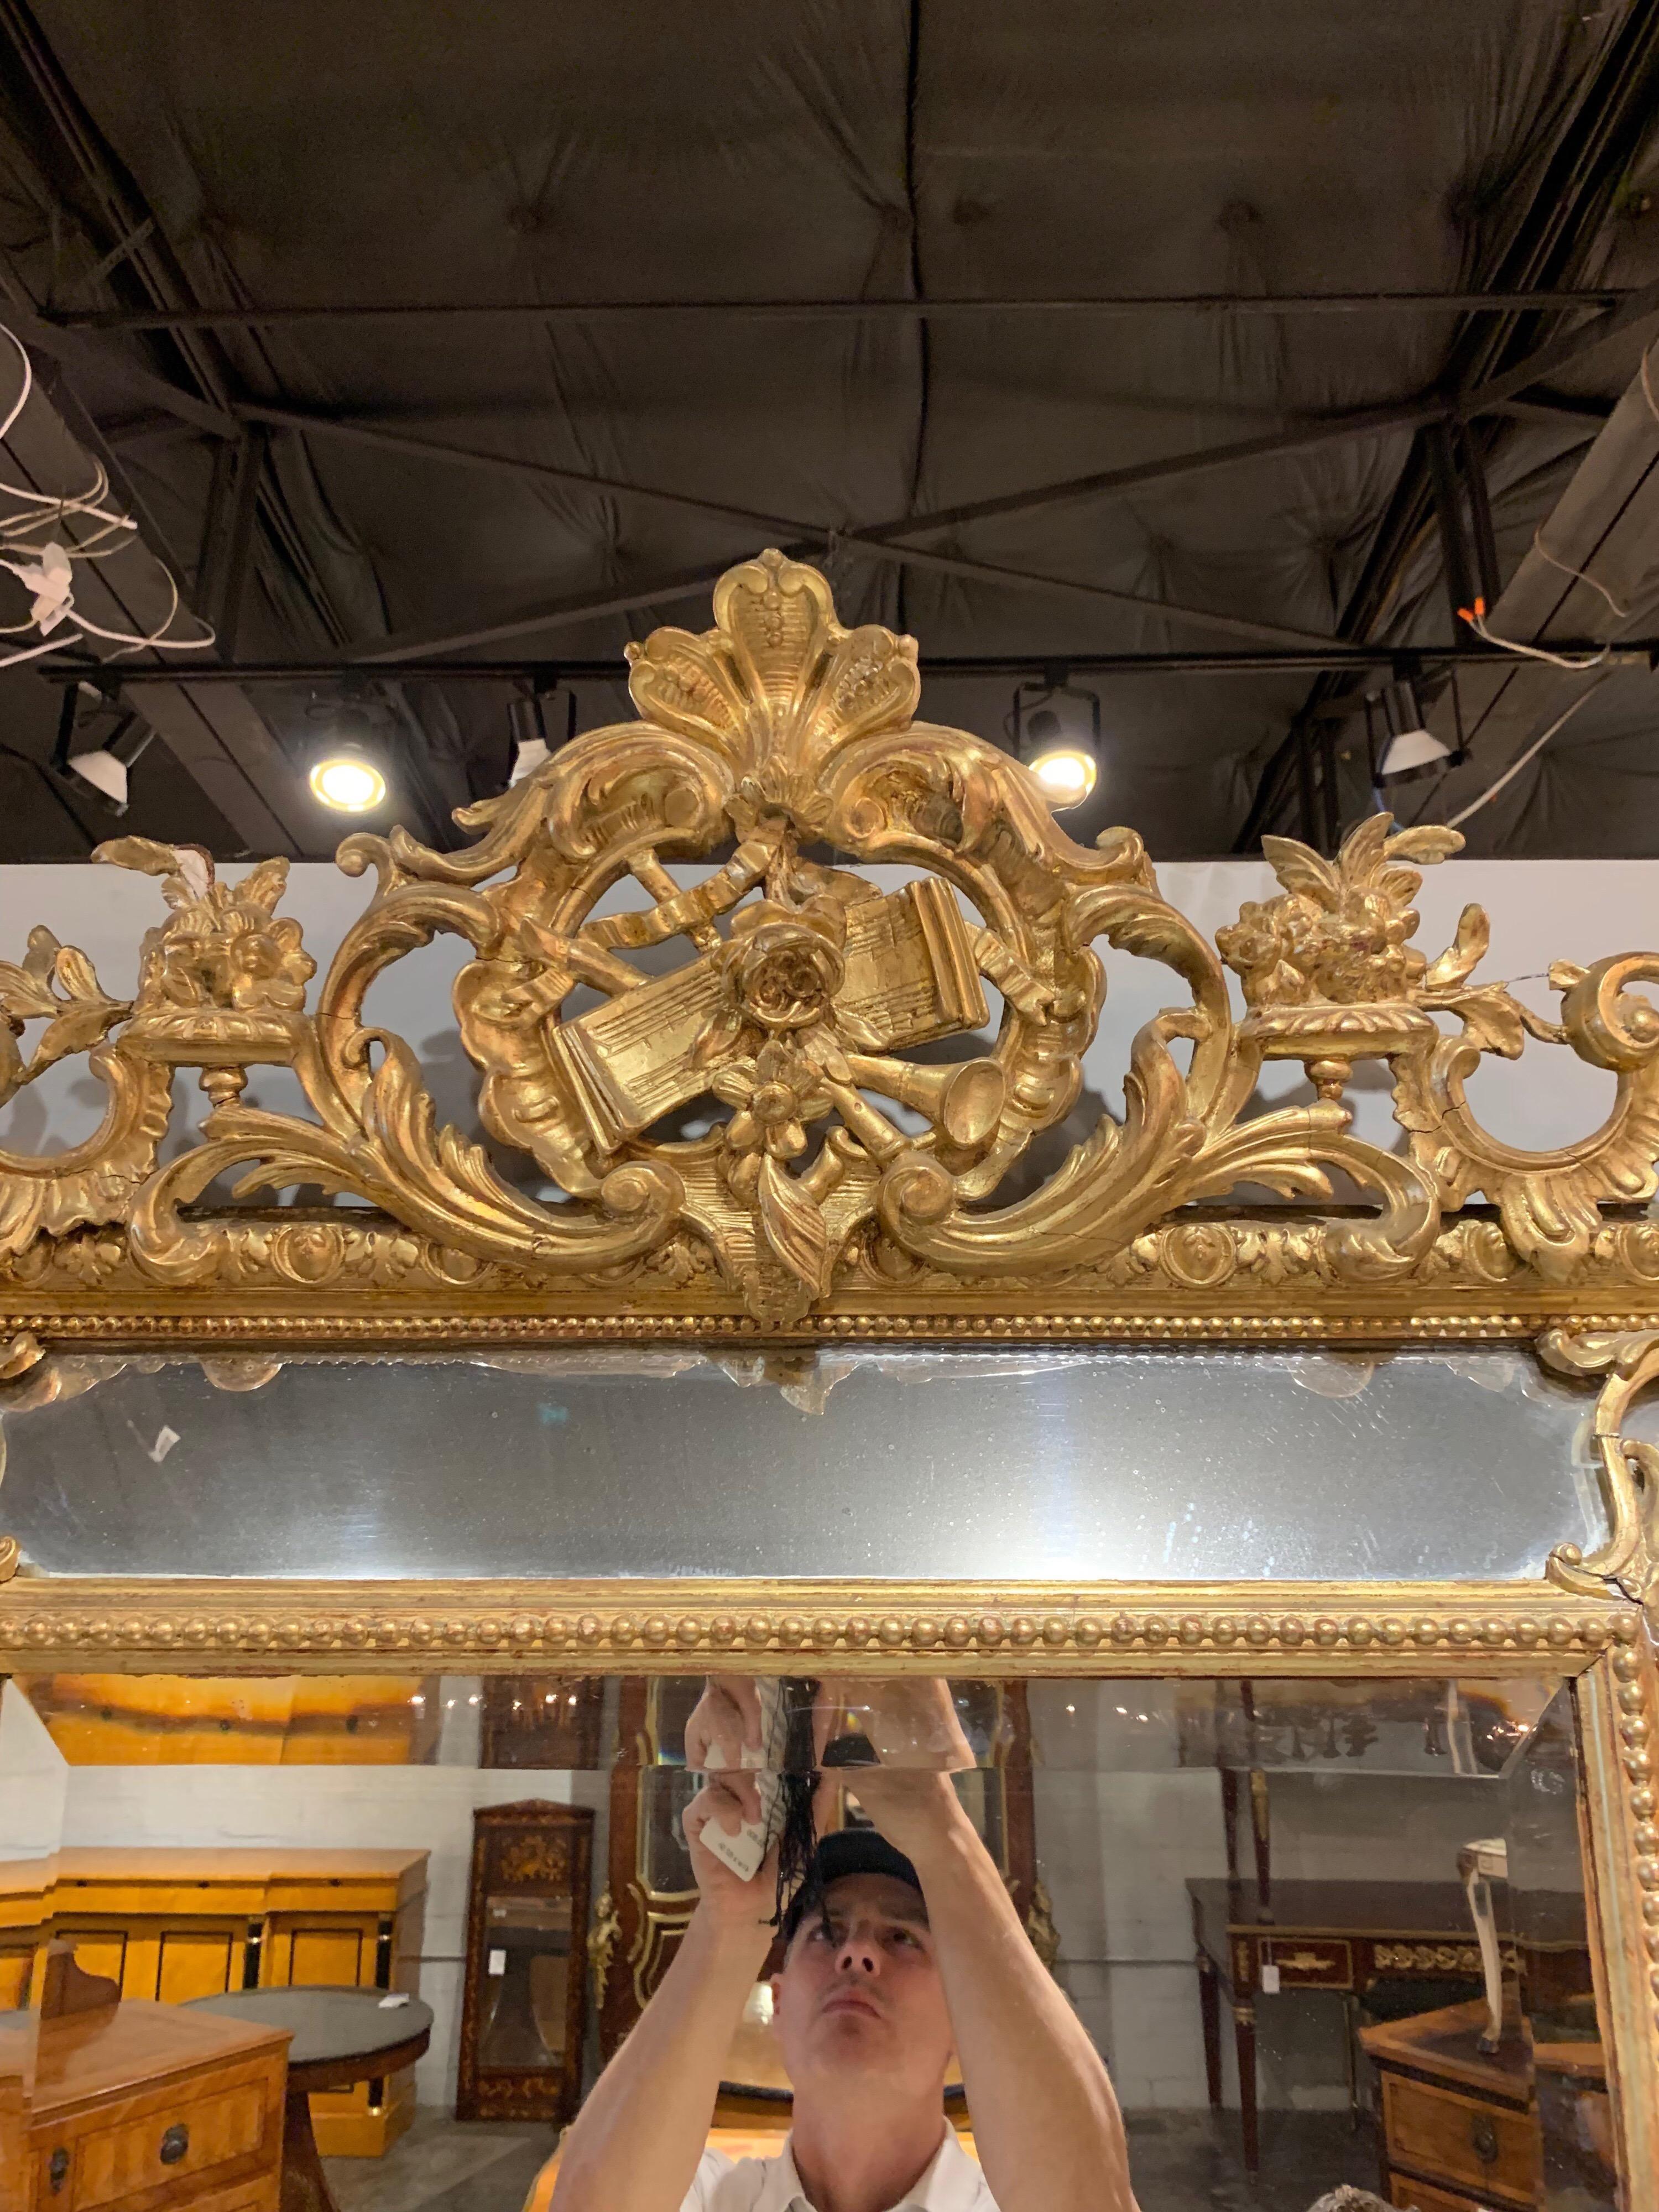 19th century French giltwood cushion mirrors. Very fine detail in the carvings that include florals, leaves, scrolls and musical instruments. Perfectly gorgeous,
circa 1860.